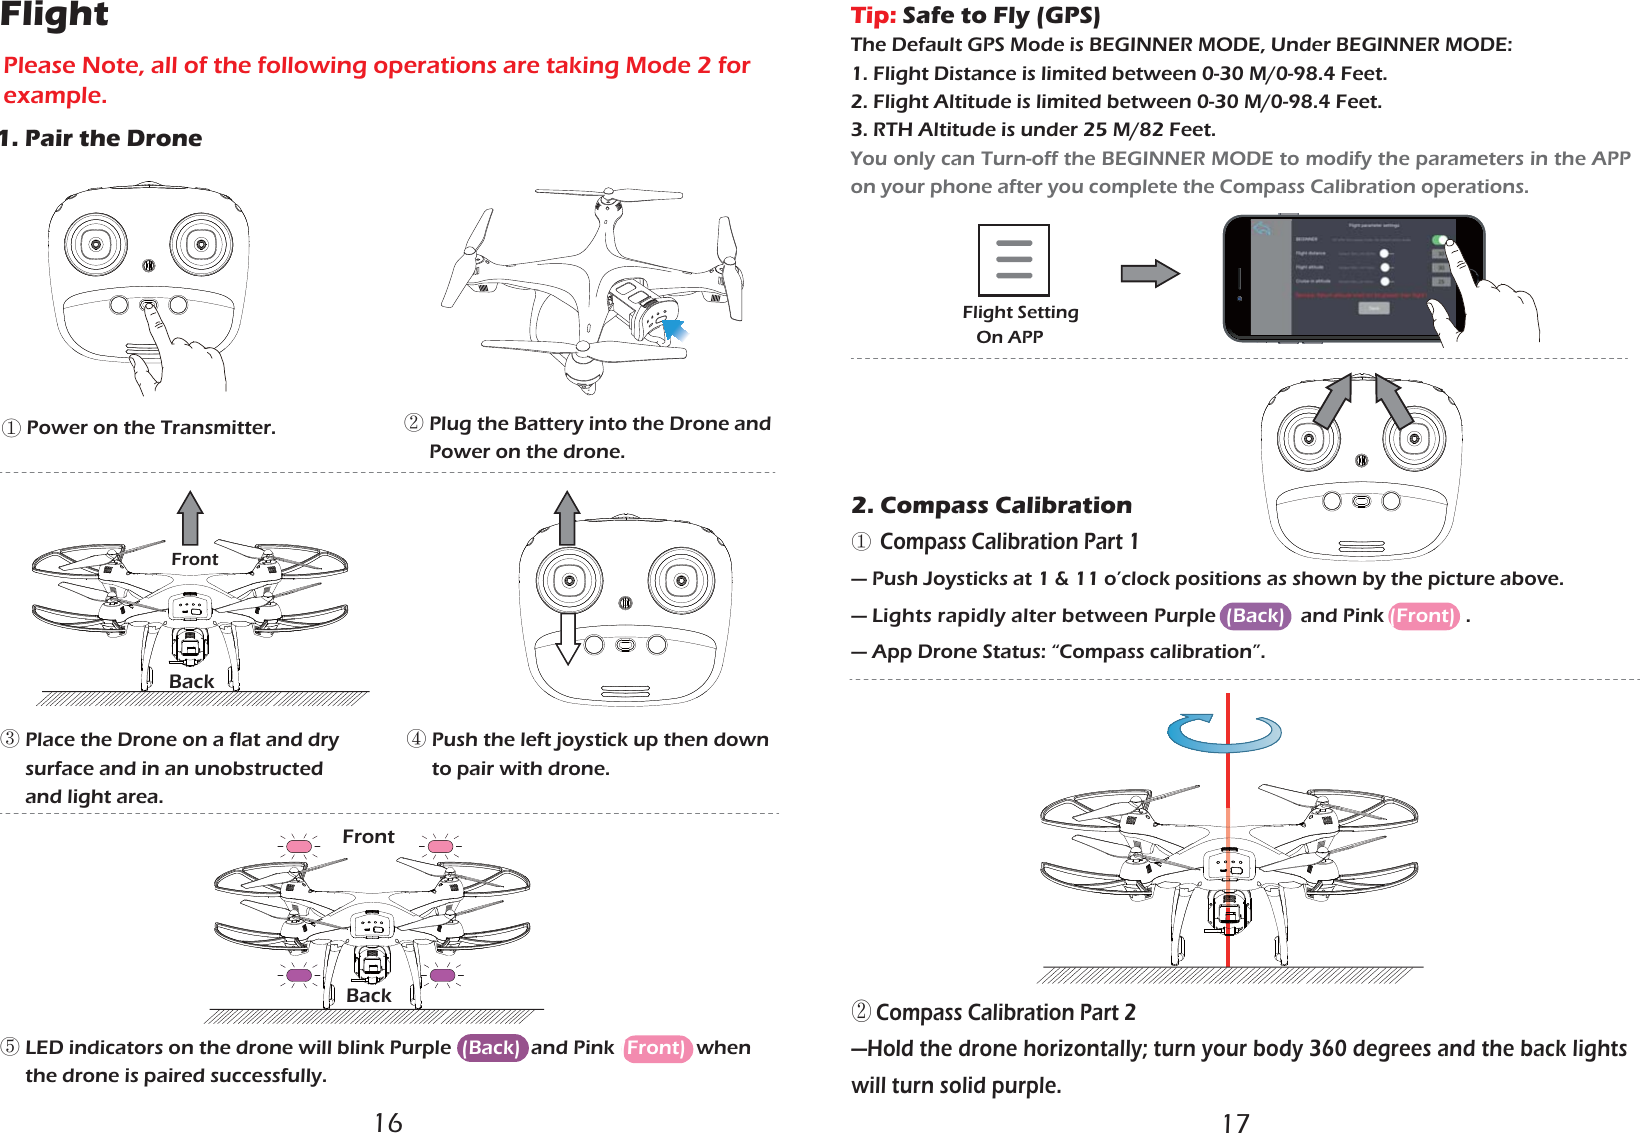 ᴺ Power on the Transmitter.⑤ LED indicators on the drone will blink Purple  (Back)  and Pink (Front)  when      the drone is paired successfully.    ② Plug the Battery into the Drone and      Power on the drone. ③ Place the Drone on a flat and dry      surface and in an unobstructed      and light area.④ Push the left joystick up then down     to pair with drone.FrontBackBackFront2. Compass Calibration①  Compass Calibration Part 1— Push Joysticks at 1 &amp; 11 o’clock positions as shown by the picture above.— Lights rapidly alter between Purple  (Back)   and Pink (Front)  .  — App Drone Status: “Compass calibration”.Flight Setting   On APP1. Pair the DroneFlightPlease Note, all of the following operations are taking Mode 2 for example.Tip: Safe to Fly (GPS)The Default GPS Mode is BEGINNER MODE, Under BEGINNER MODE:1. Flight Distance is limited between 0-30 M/0-98.4 Feet. 2. Flight Altitude is limited between 0-30 M/0-98.4 Feet.3. RTH Altitude is under 25 M/82 Feet.You only can Turn-off the BEGINNER MODE to modify the parameters in the APP on your phone after you complete the Compass Calibration operations. ② Compass Calibration Part 2—Hold the drone horizontally; turn your body 360 degrees and the back lights will turn solid purple.16 17